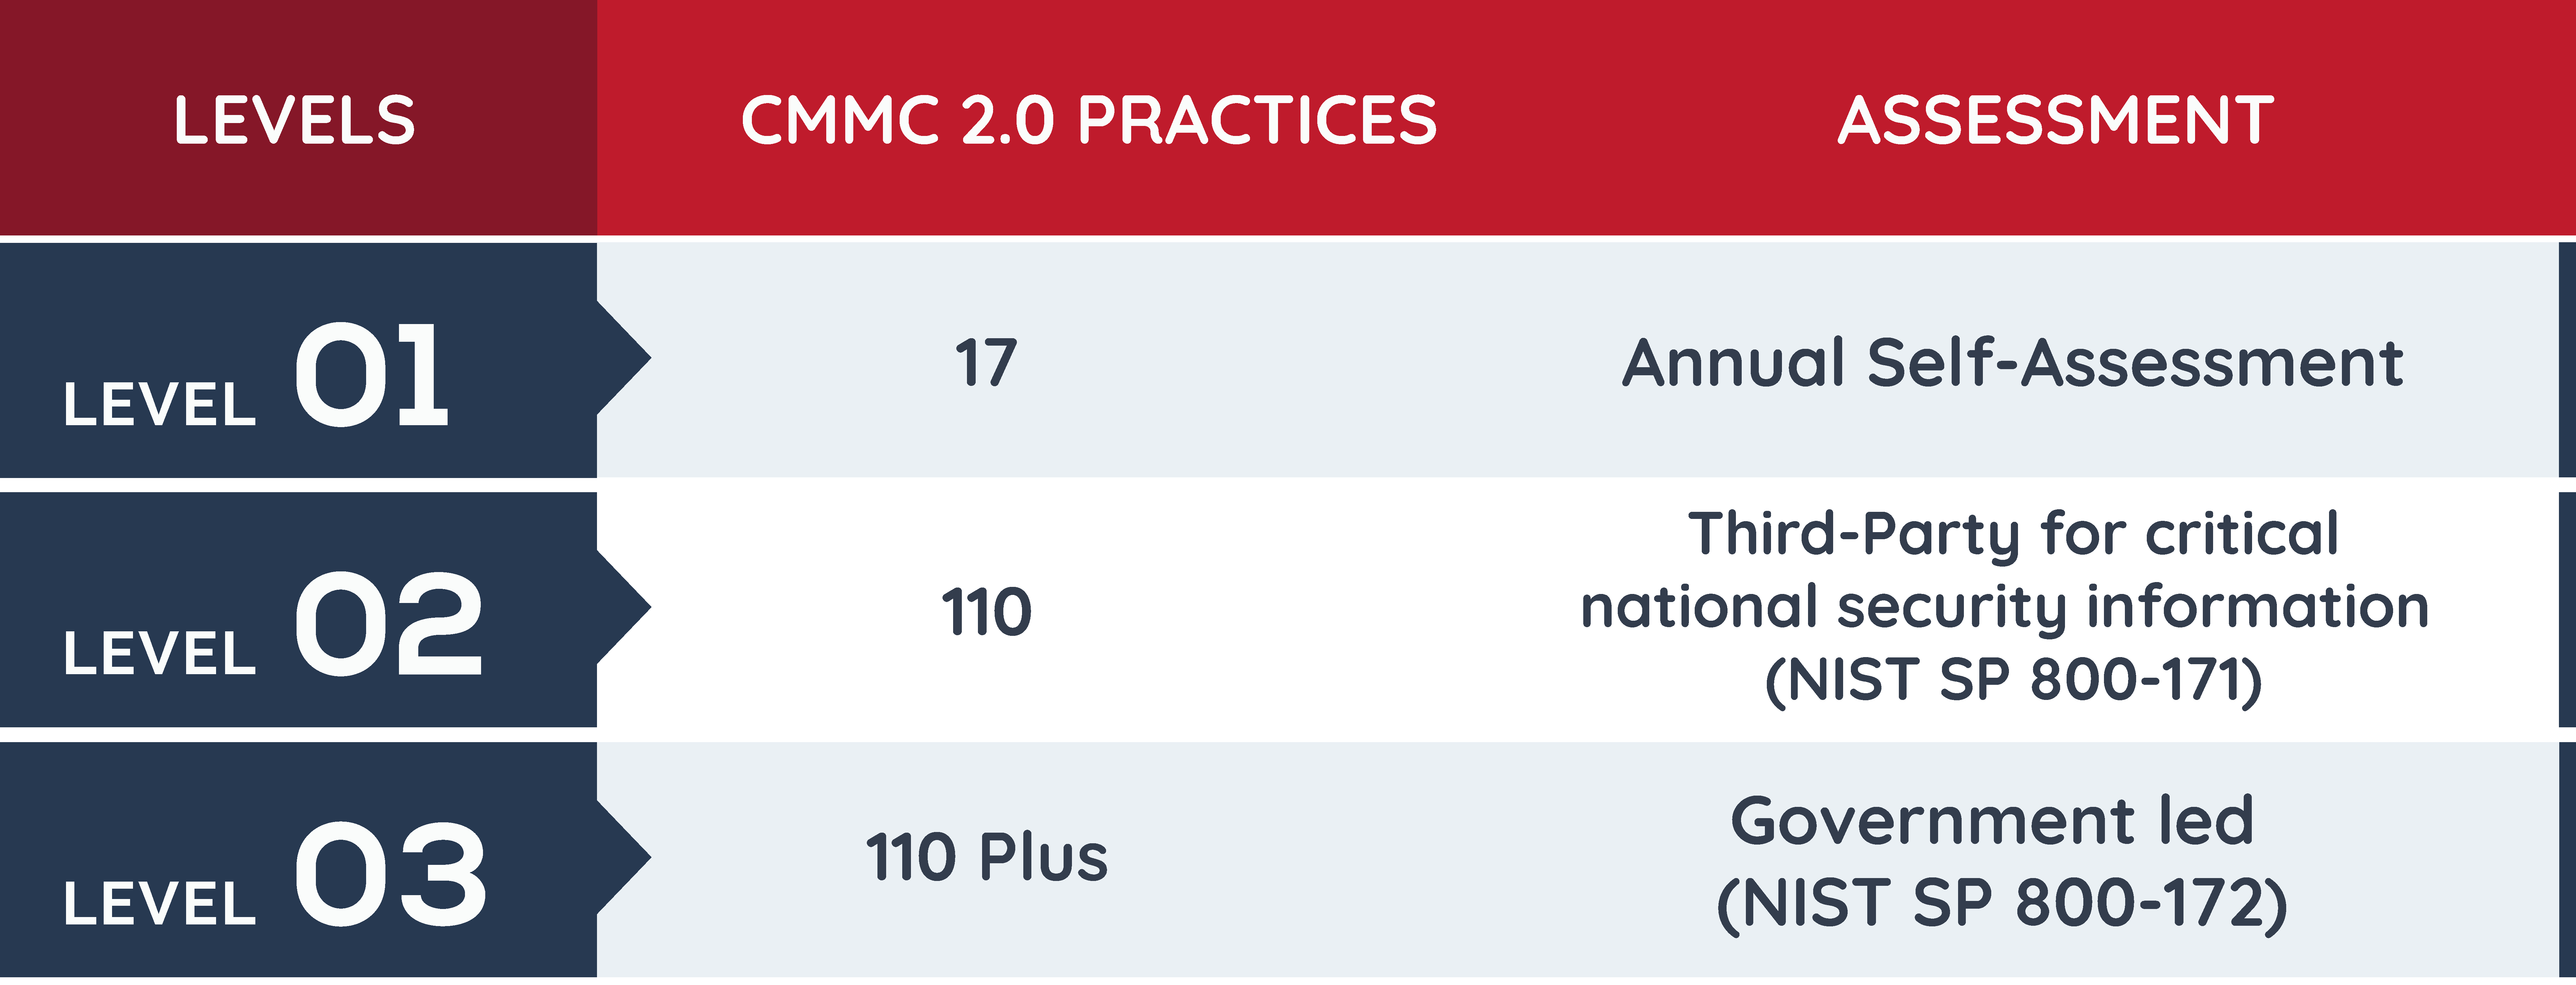 cmmc 2.0 structure table